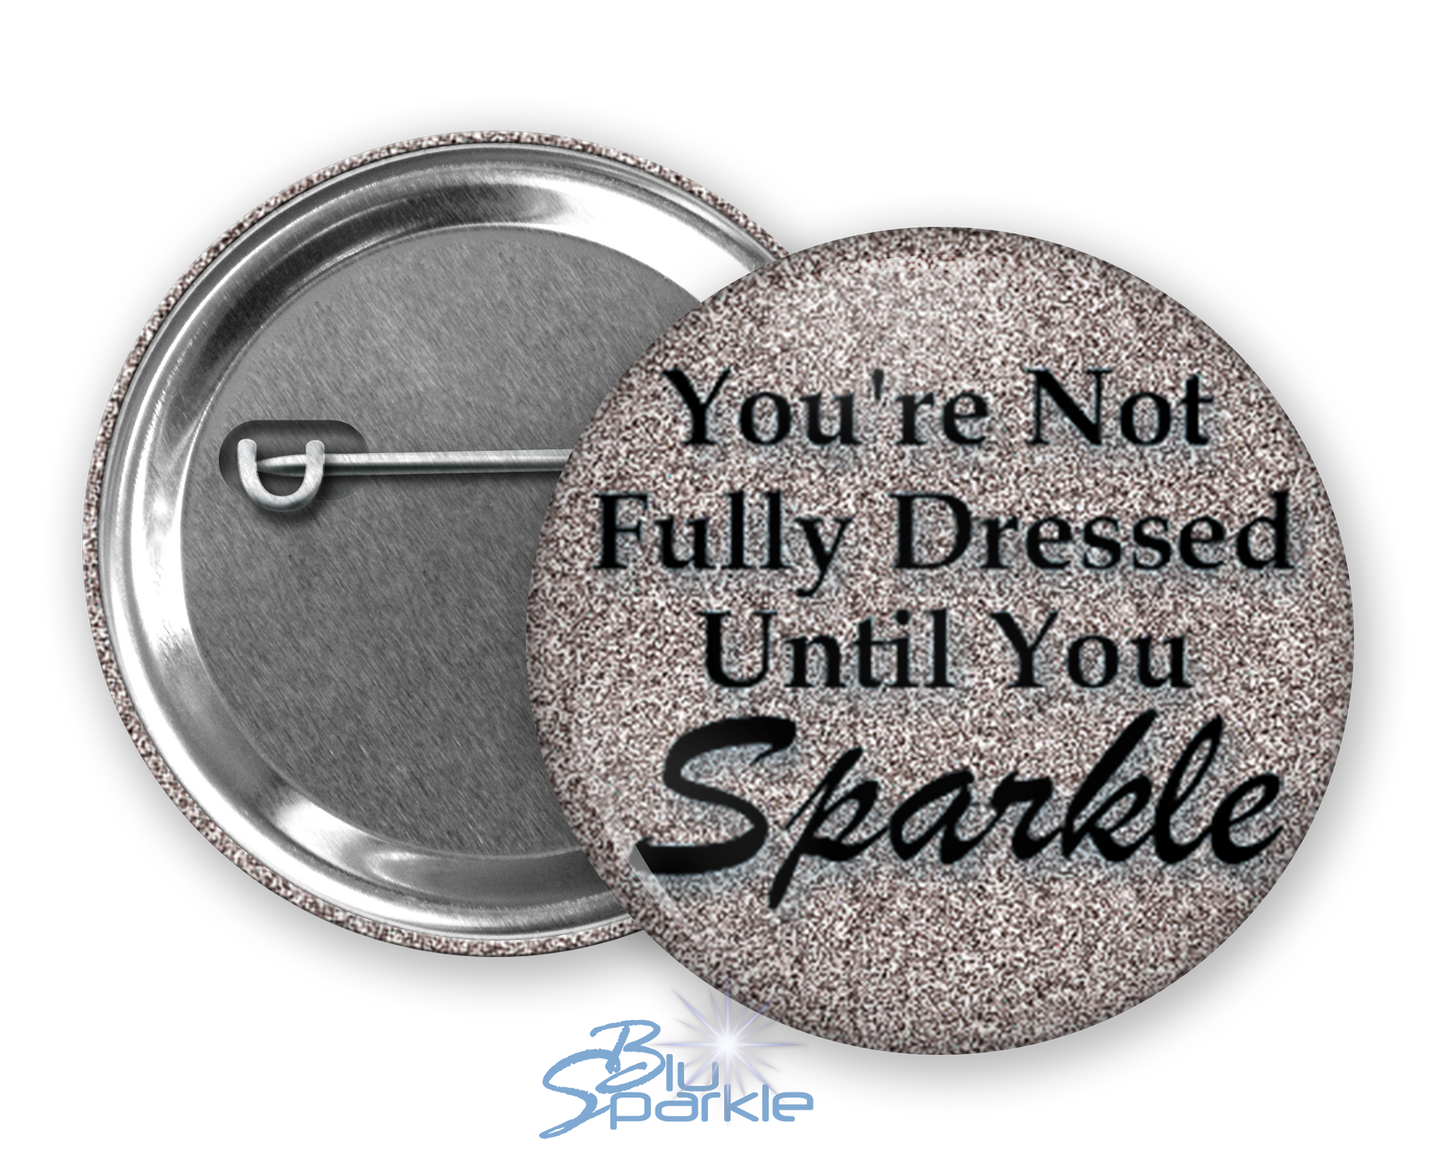 You’re Not Fully Dressed Until You Sparkle - Pinback Buttons